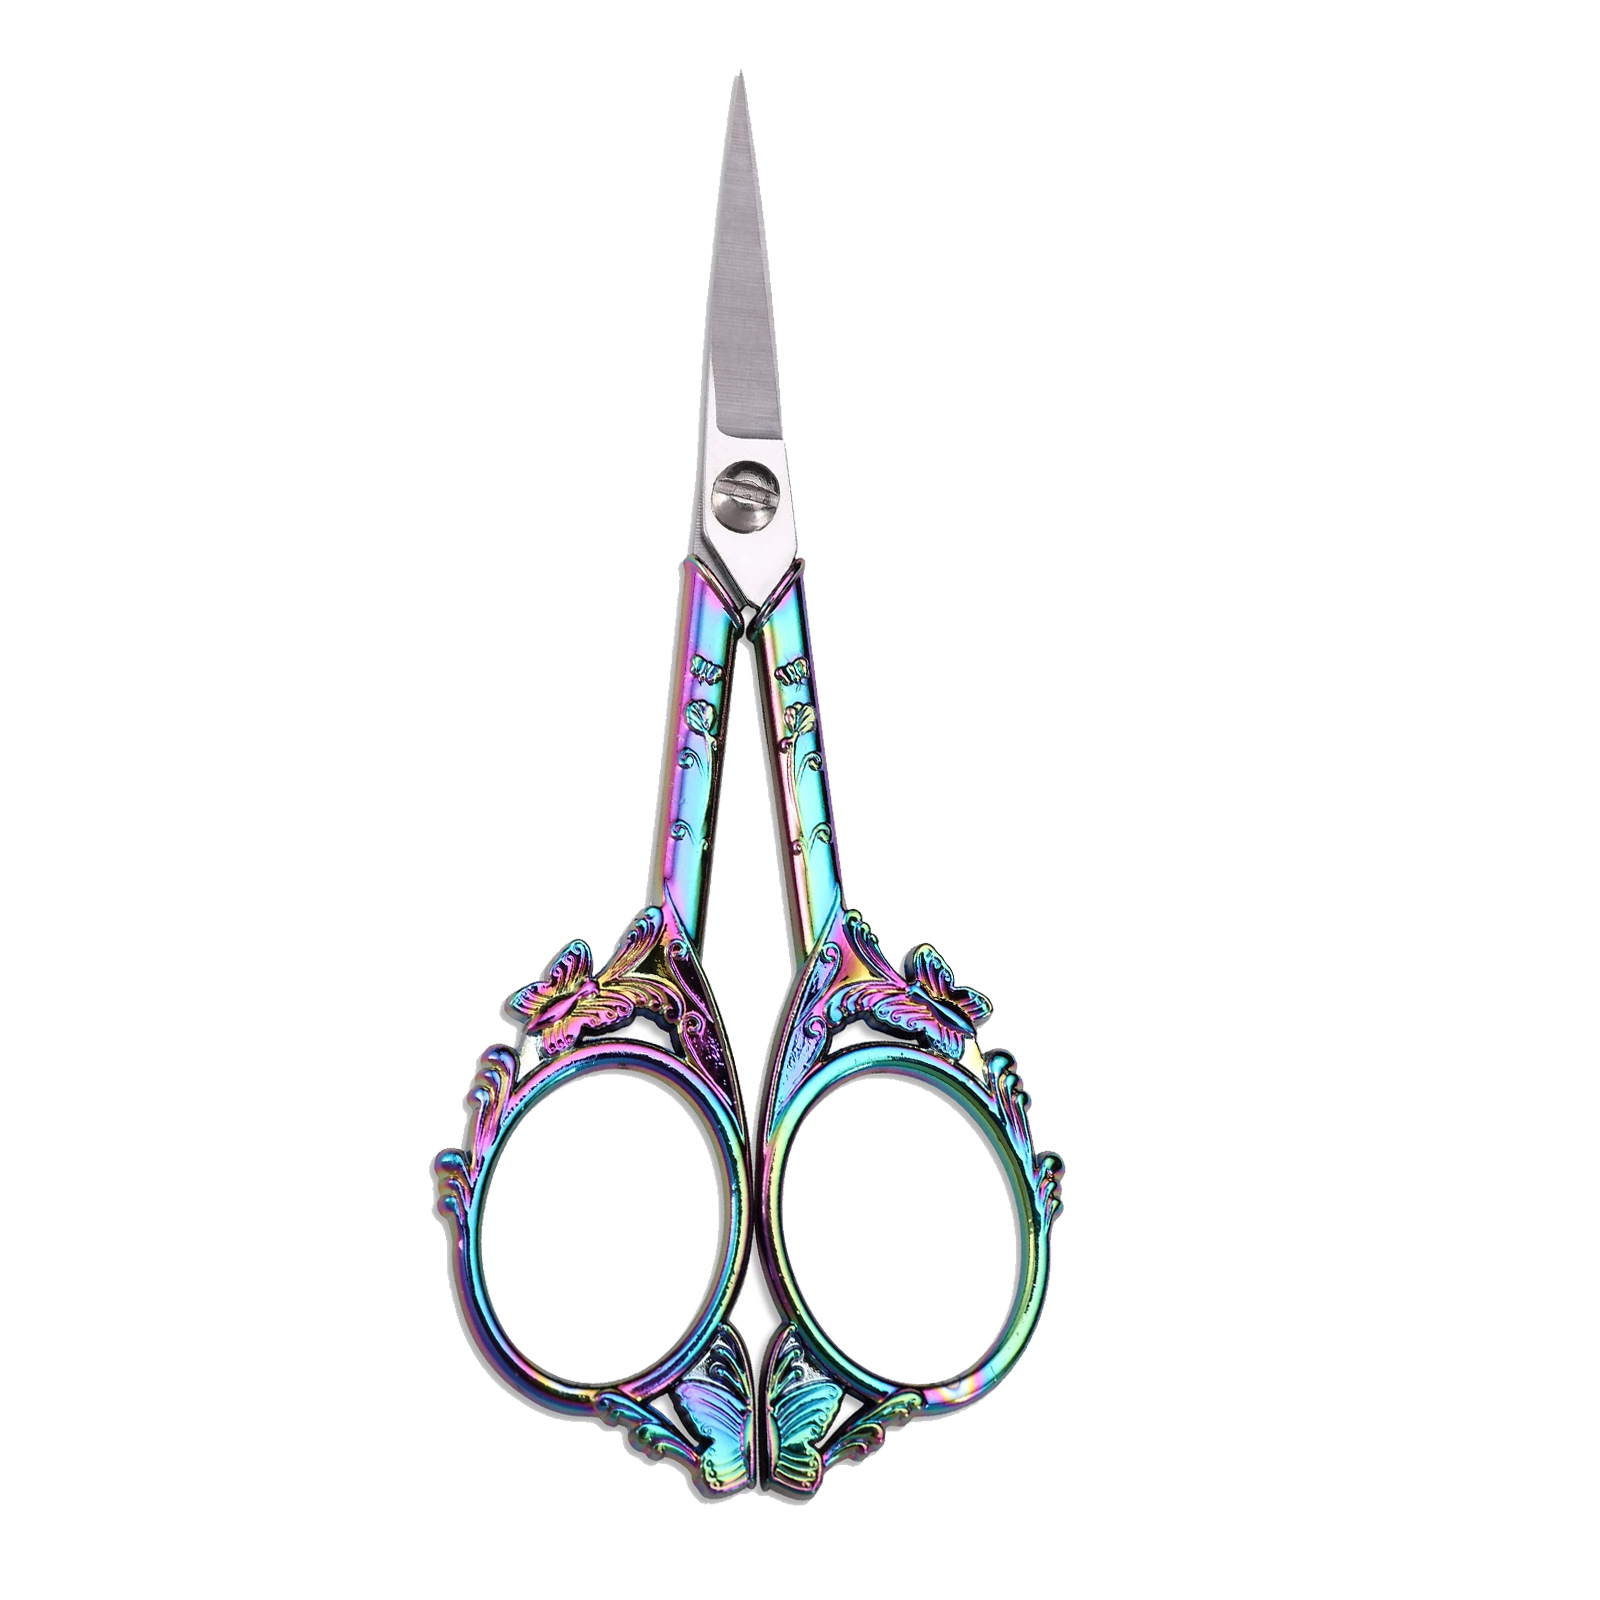 Mini Embroidery Scissors, 4 Colors Available. Small Vintage